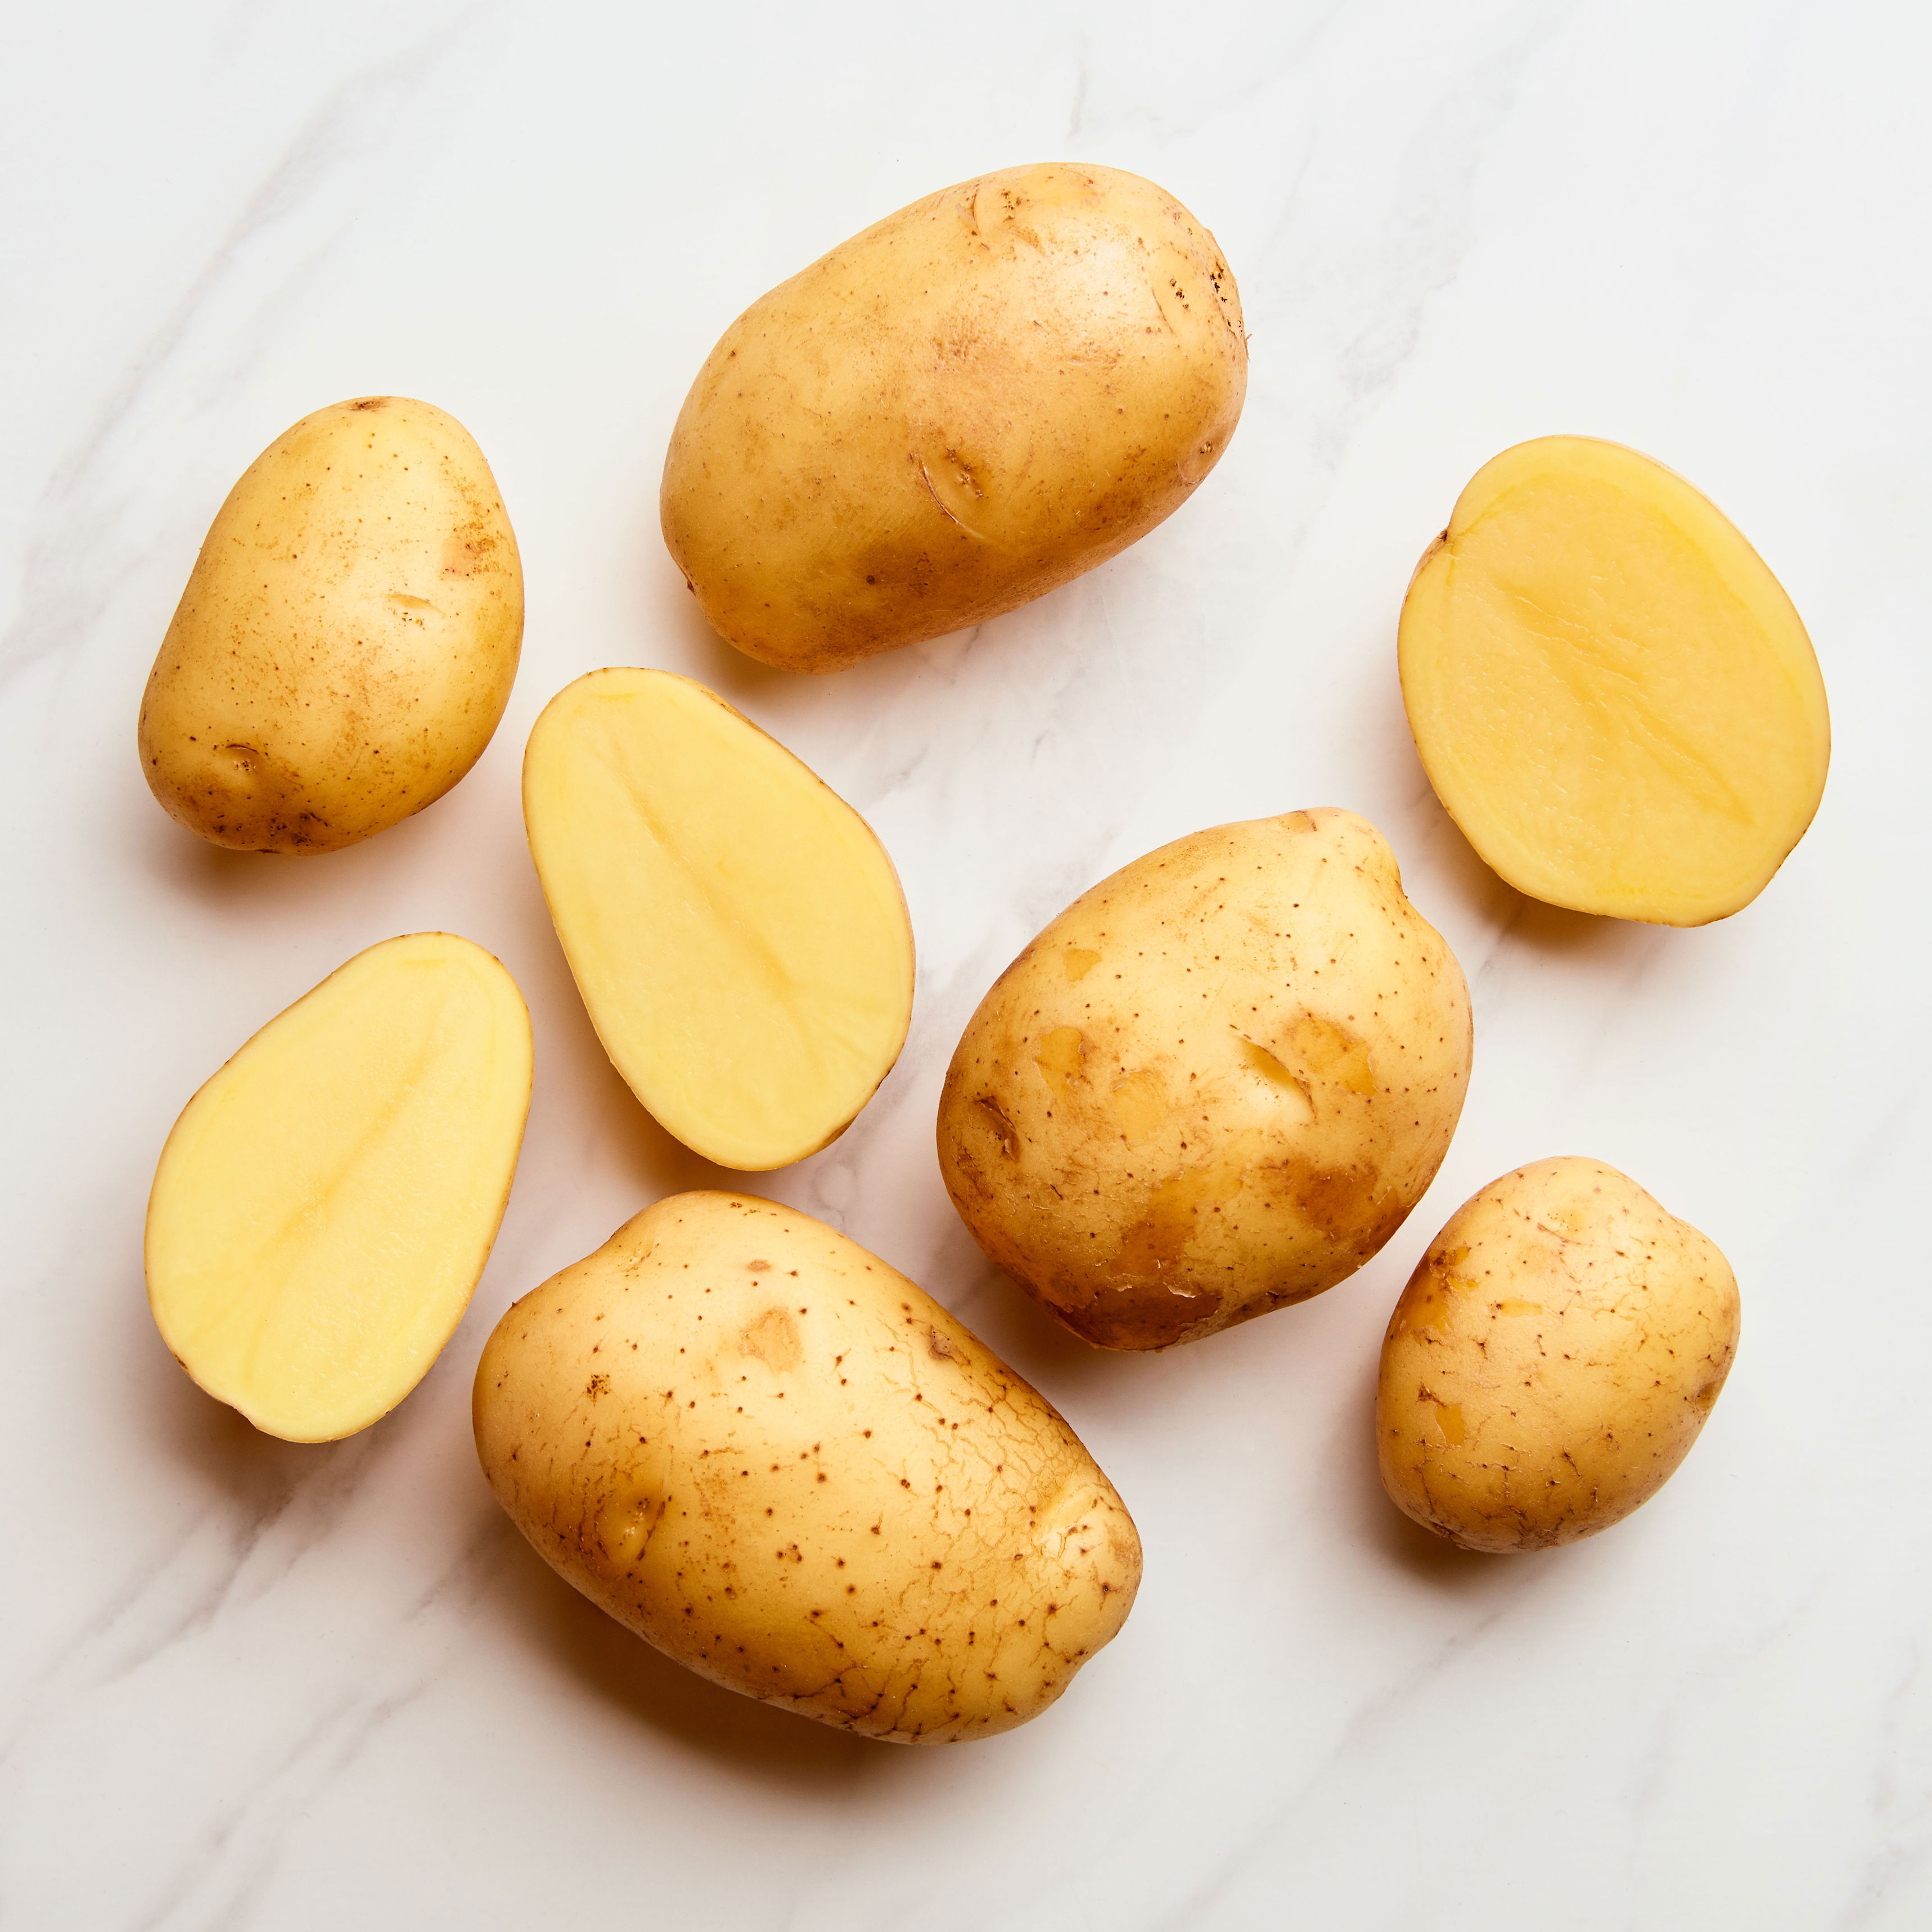 12 Types of Potatoes and How to Cook With Them